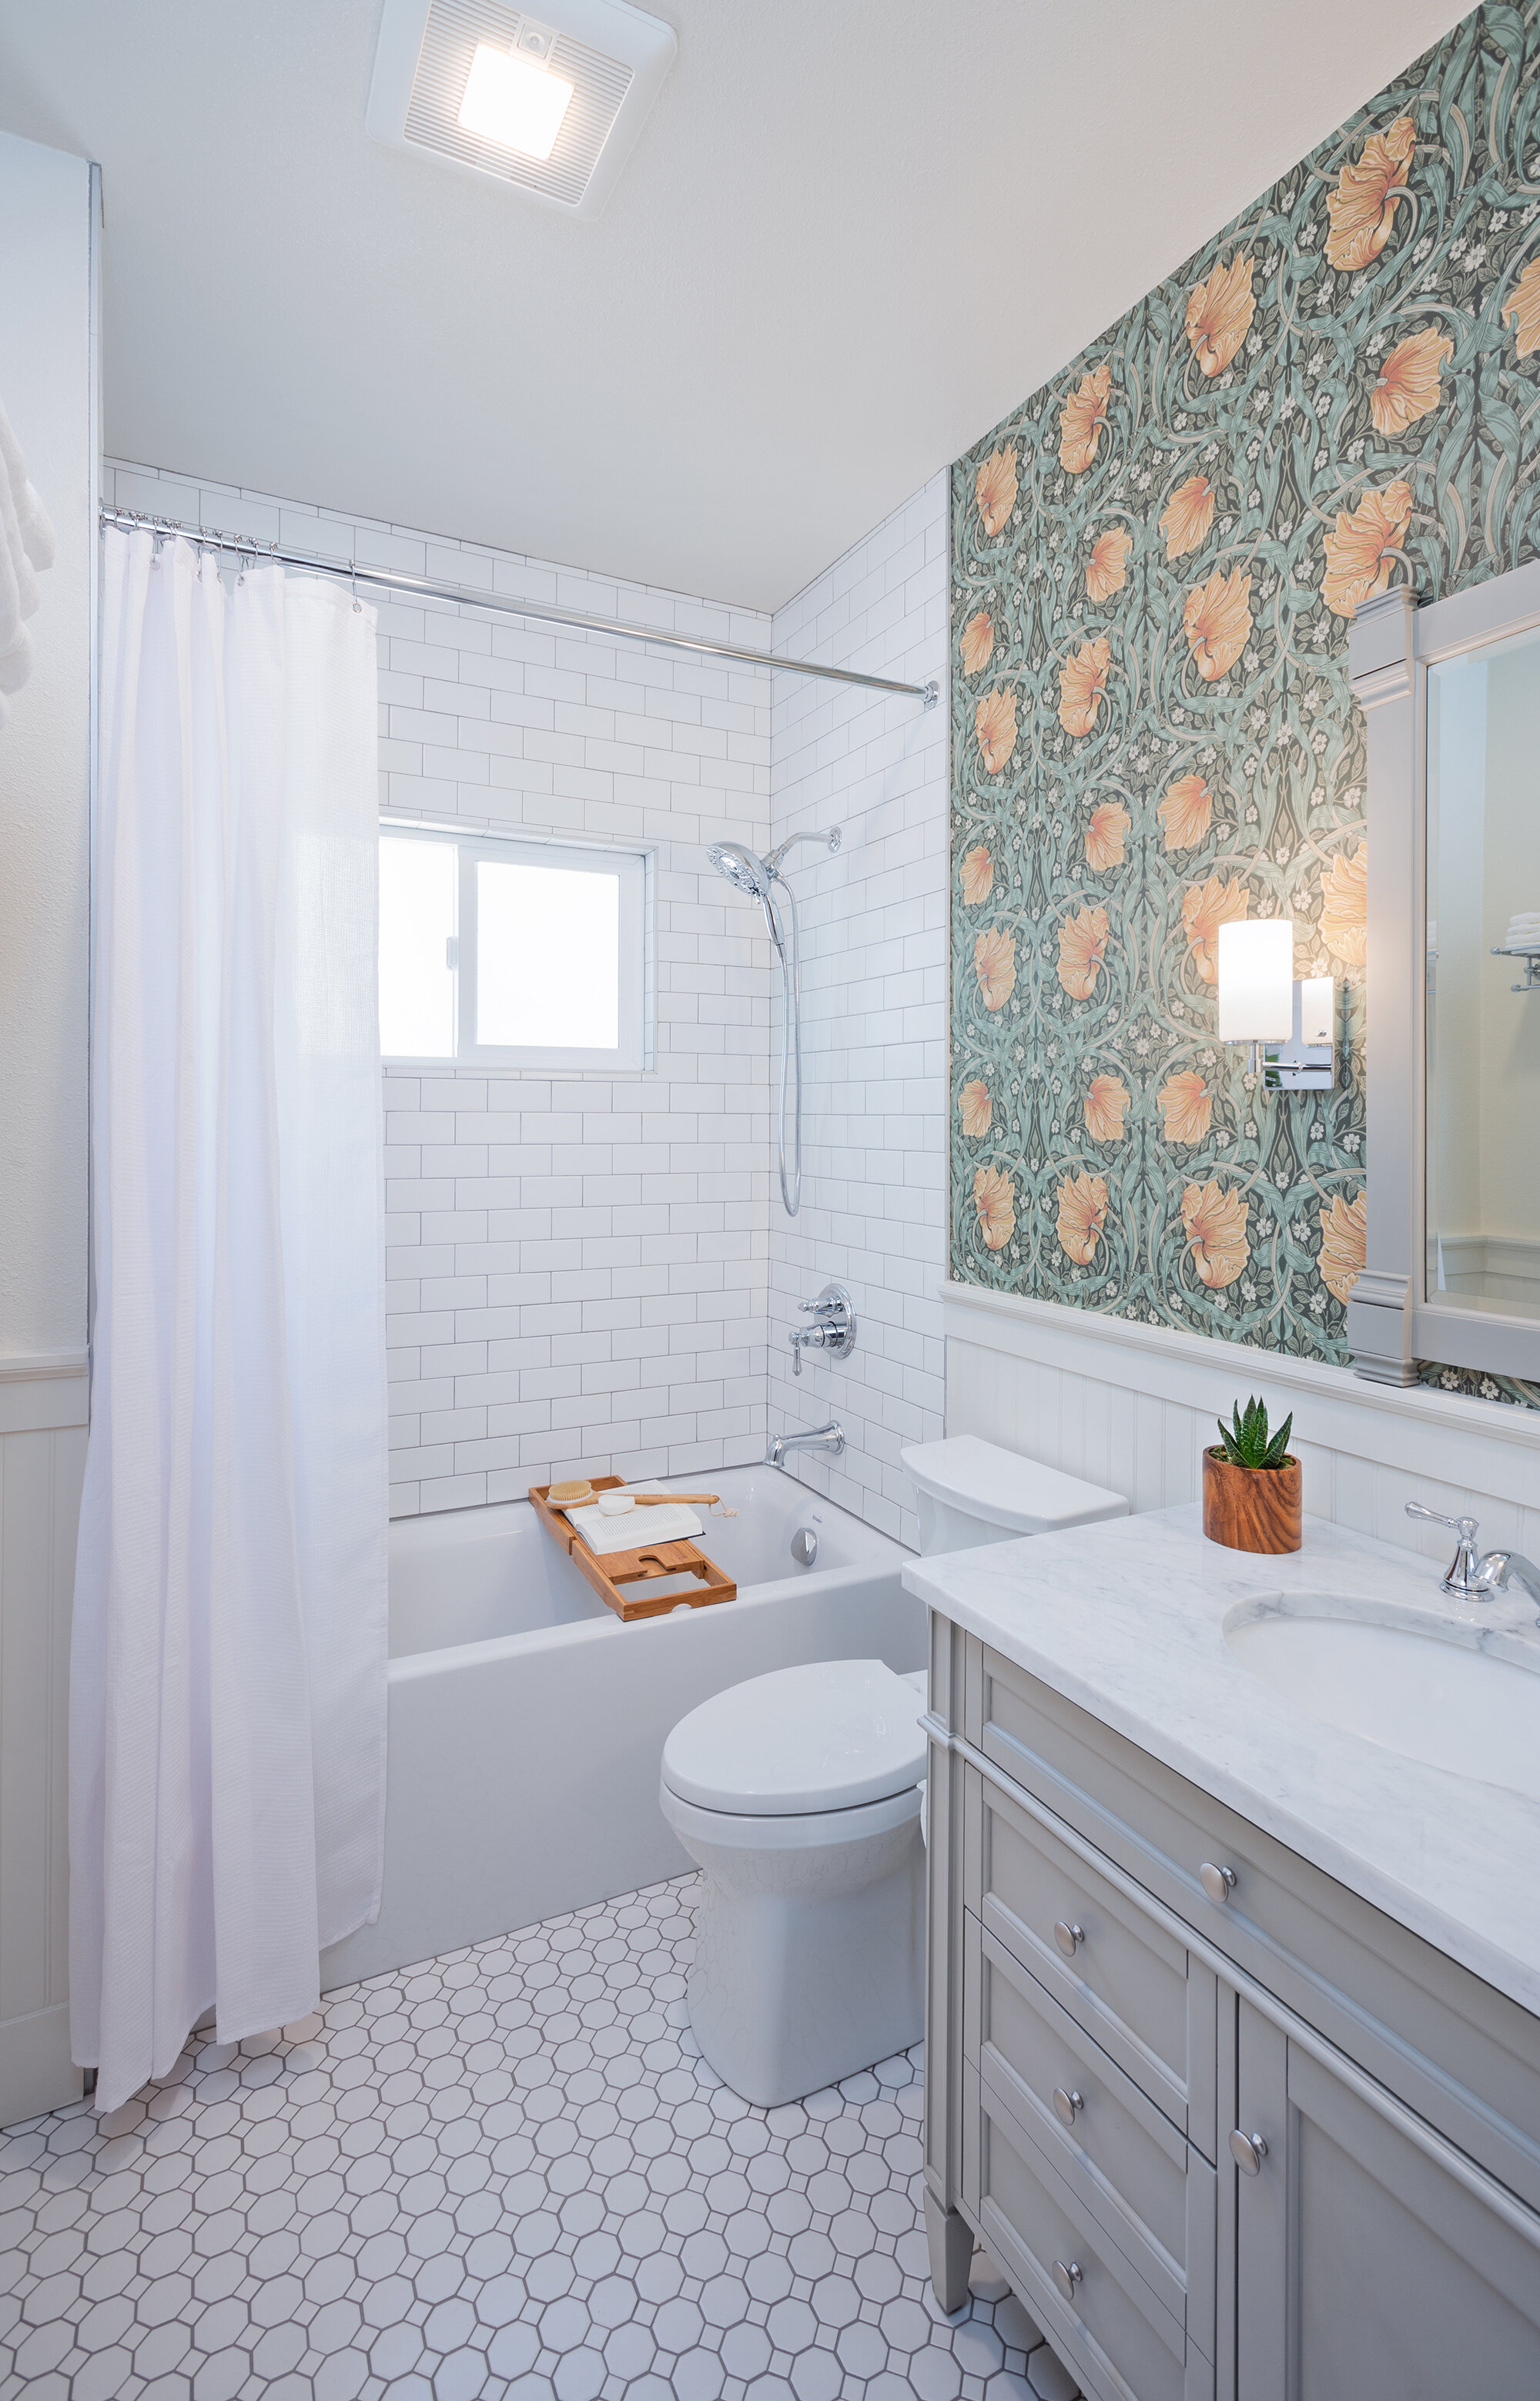 The William Morris wallpaper in this bathroom in a 1920’s bungalow is period perfect.